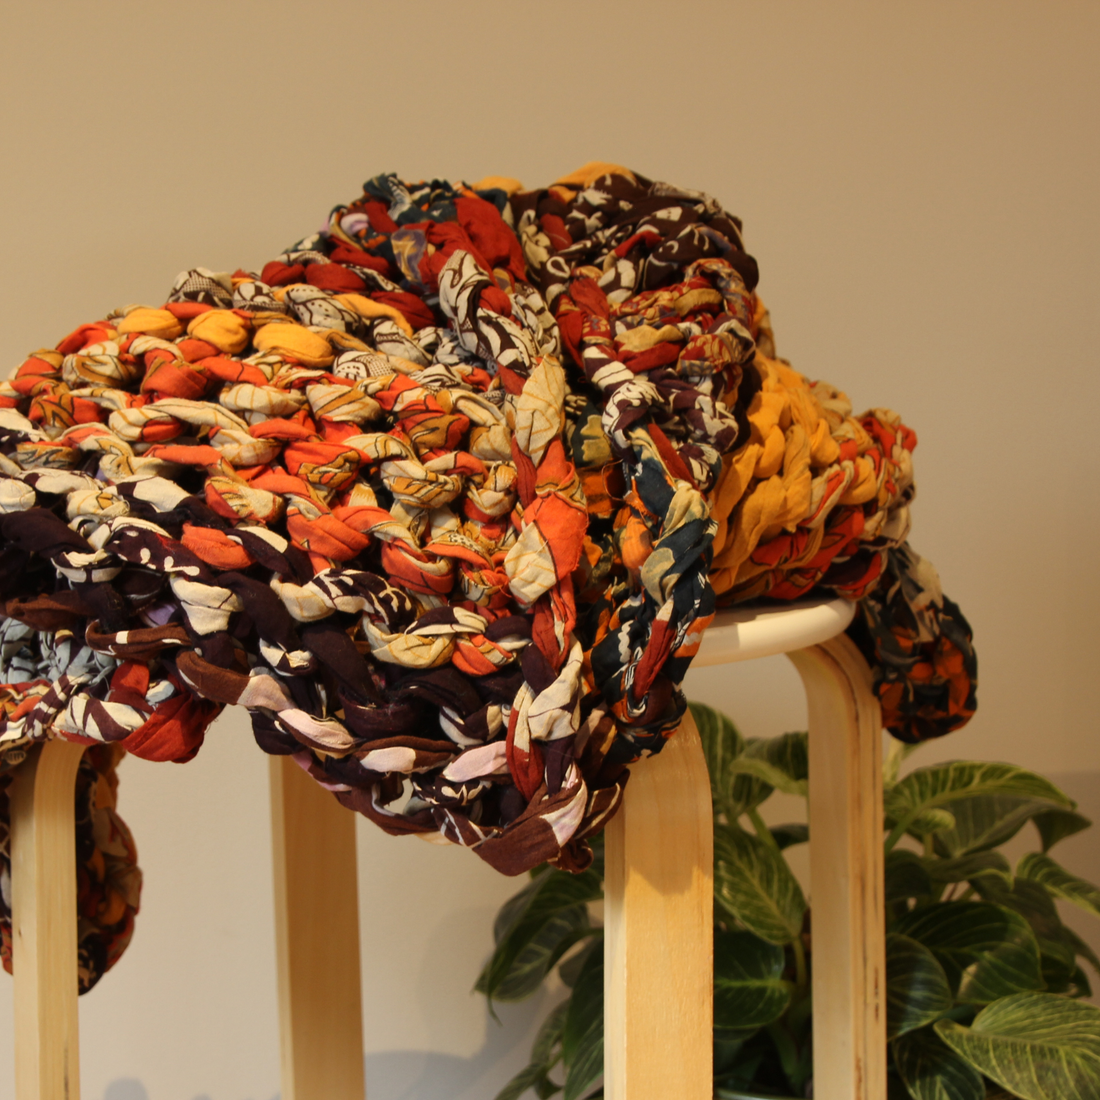 Blankets fair trade ethical sustainable fashion Knotted Throw - Oranges & Browns conscious purchase Basha